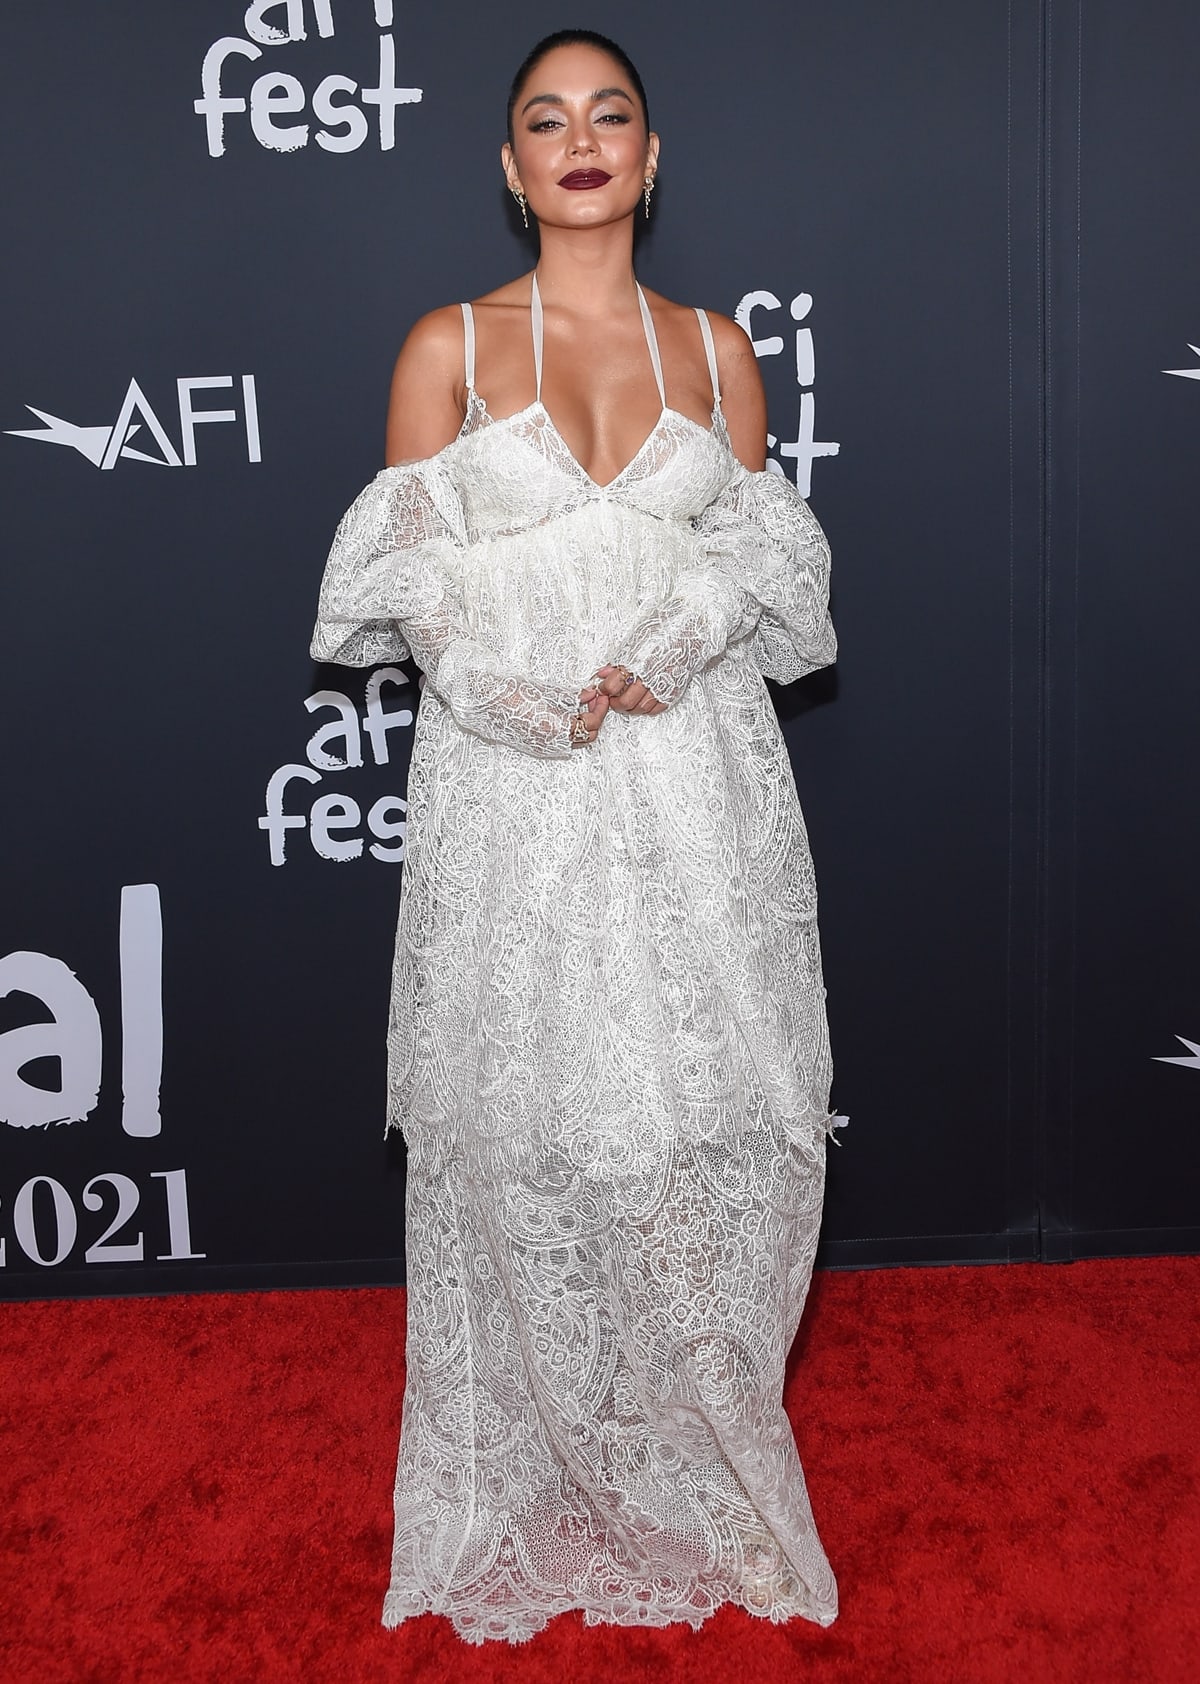 Vanessa Hudgens wears a tiered white lace dress from the Vera Wang Spring 2022 collection and waterfall earrings from SHAY jewelry